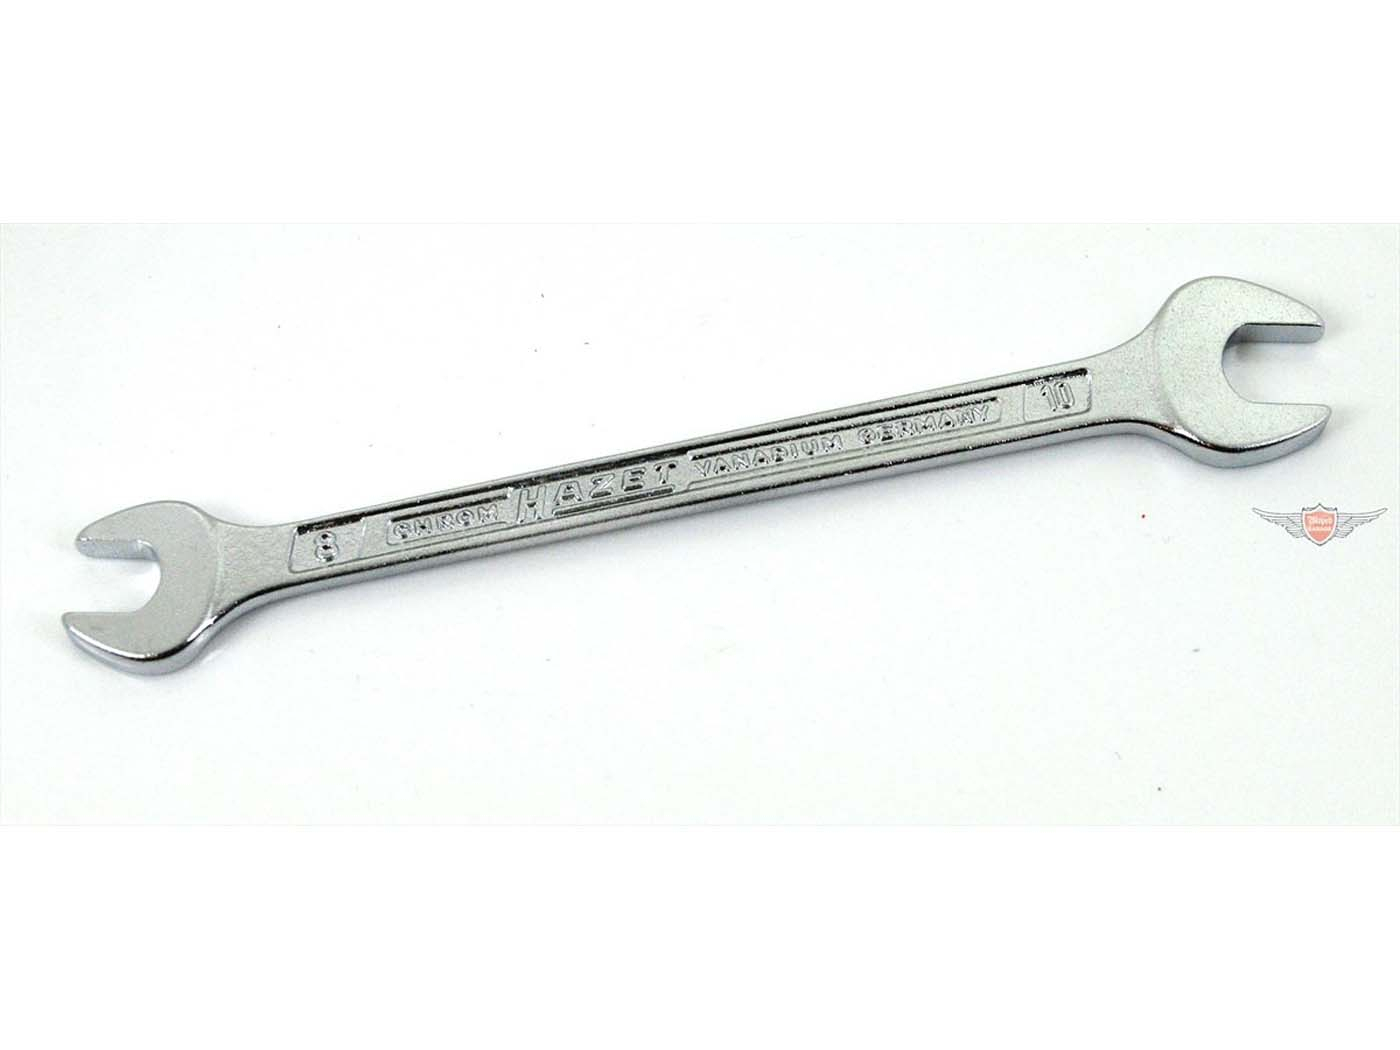 Moped Scooter Motorcycle Tool Hazet Double Open-end Wrench Open-end Wrench 8